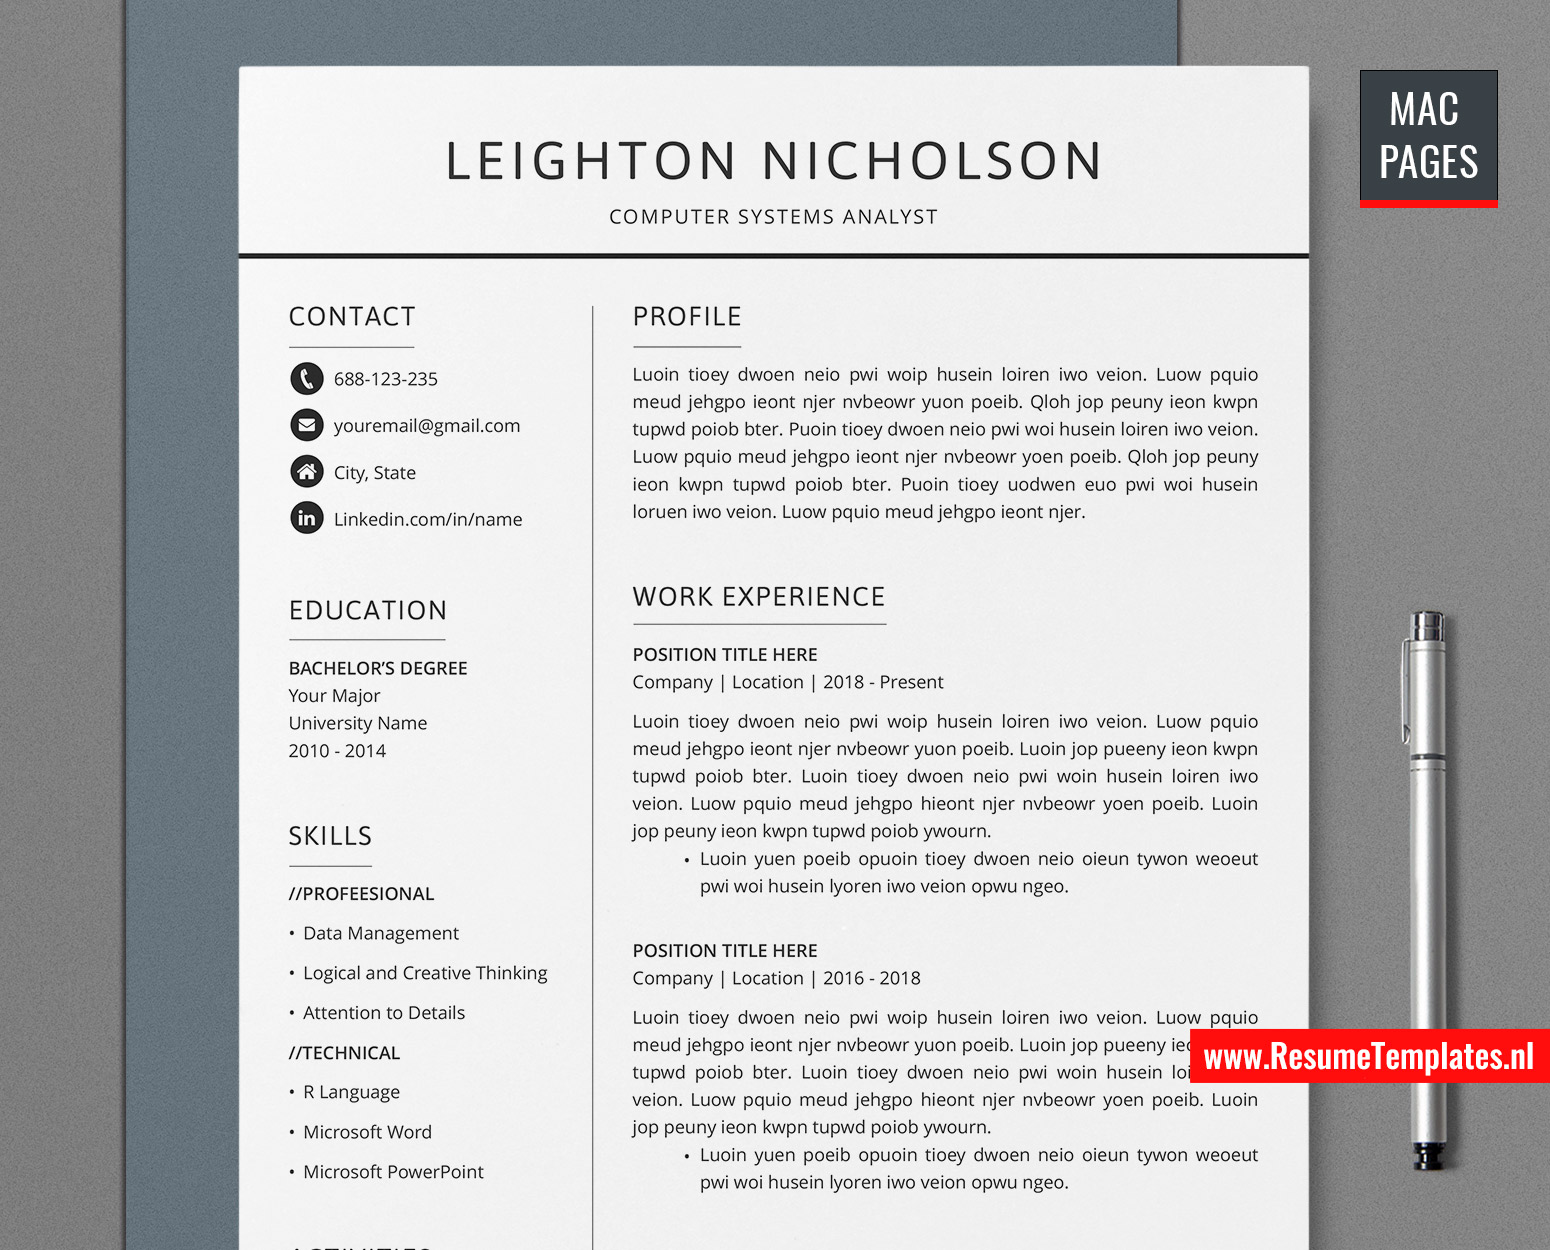 For Mac Pages Simple CV Template / Resume Template for Mac Pages